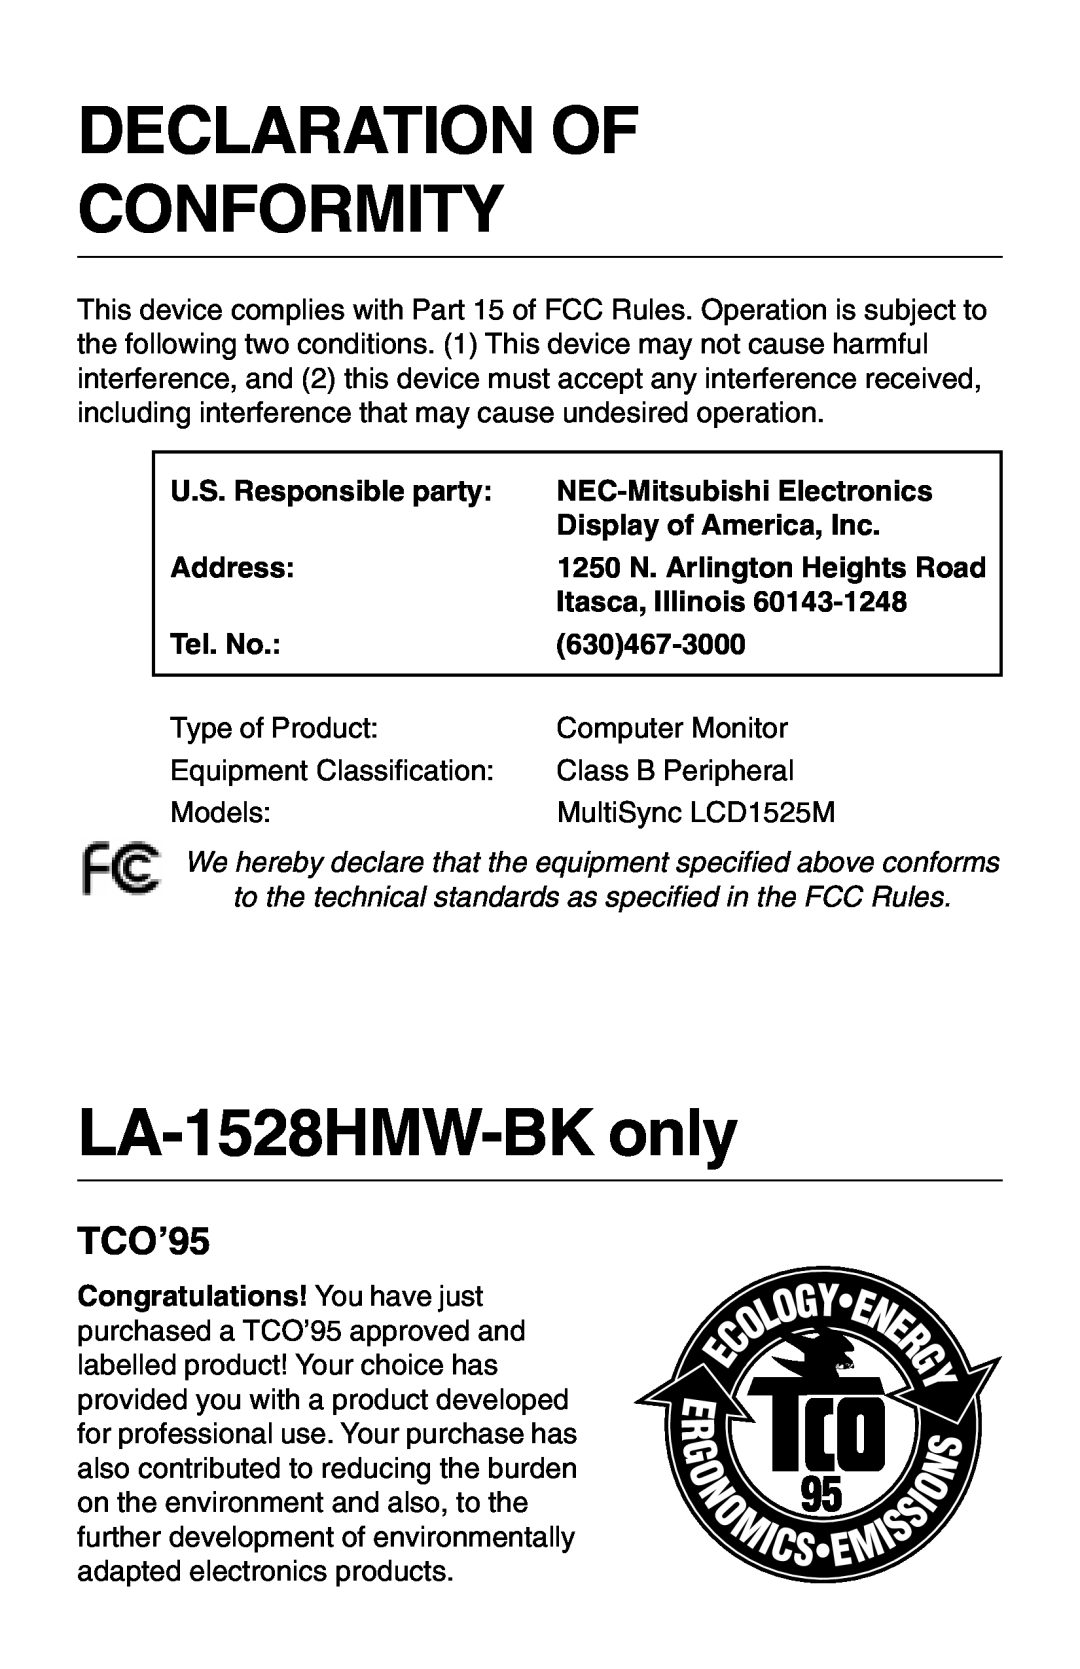 NEC 1525M Declaration Of Conformity, LA-1528HMW-BK only, TCO’95, to the technical standards as specified in the FCC Rules 